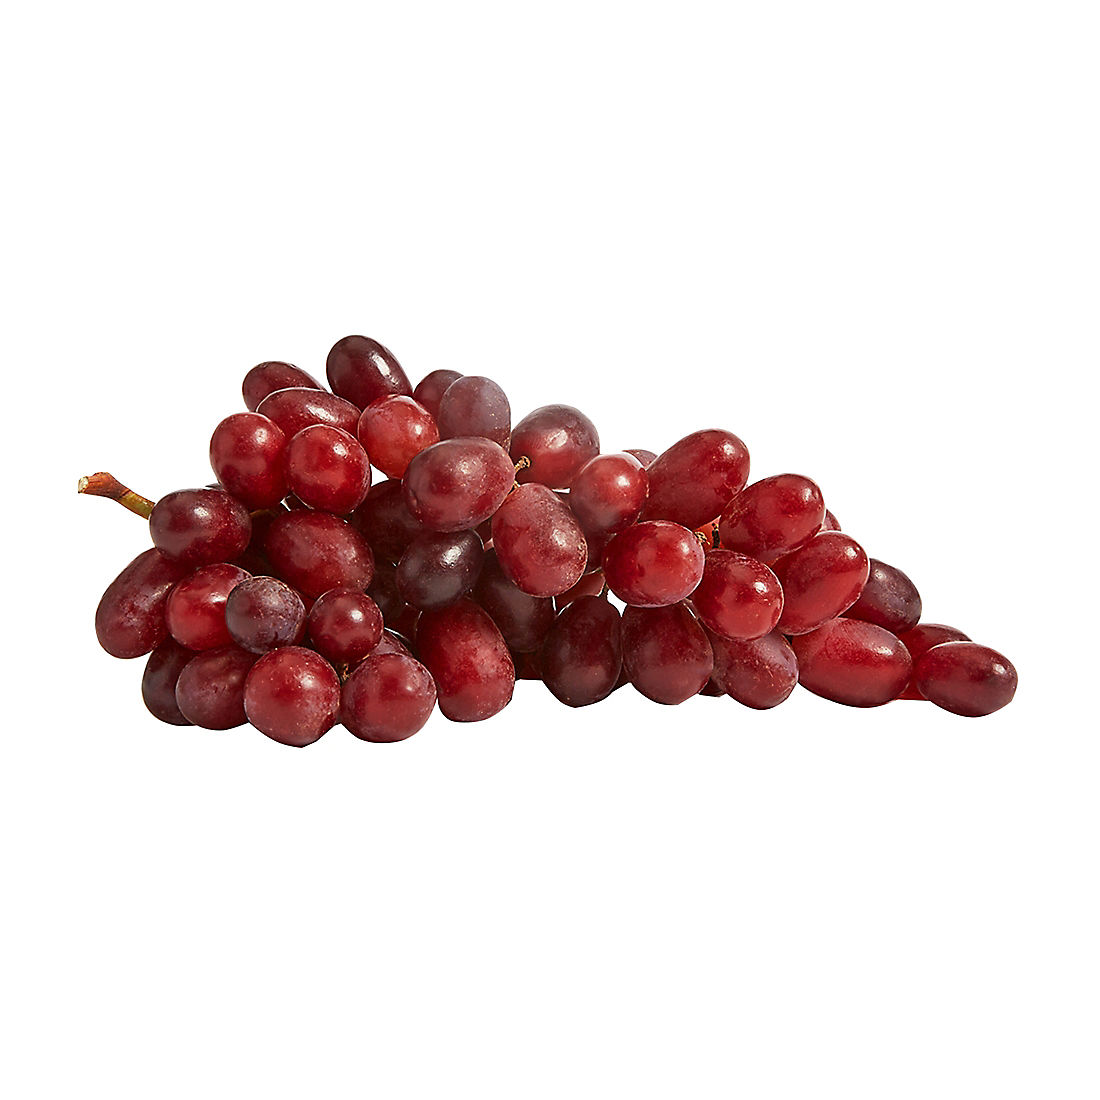 Seedless Red Grapes, 3 lbs.